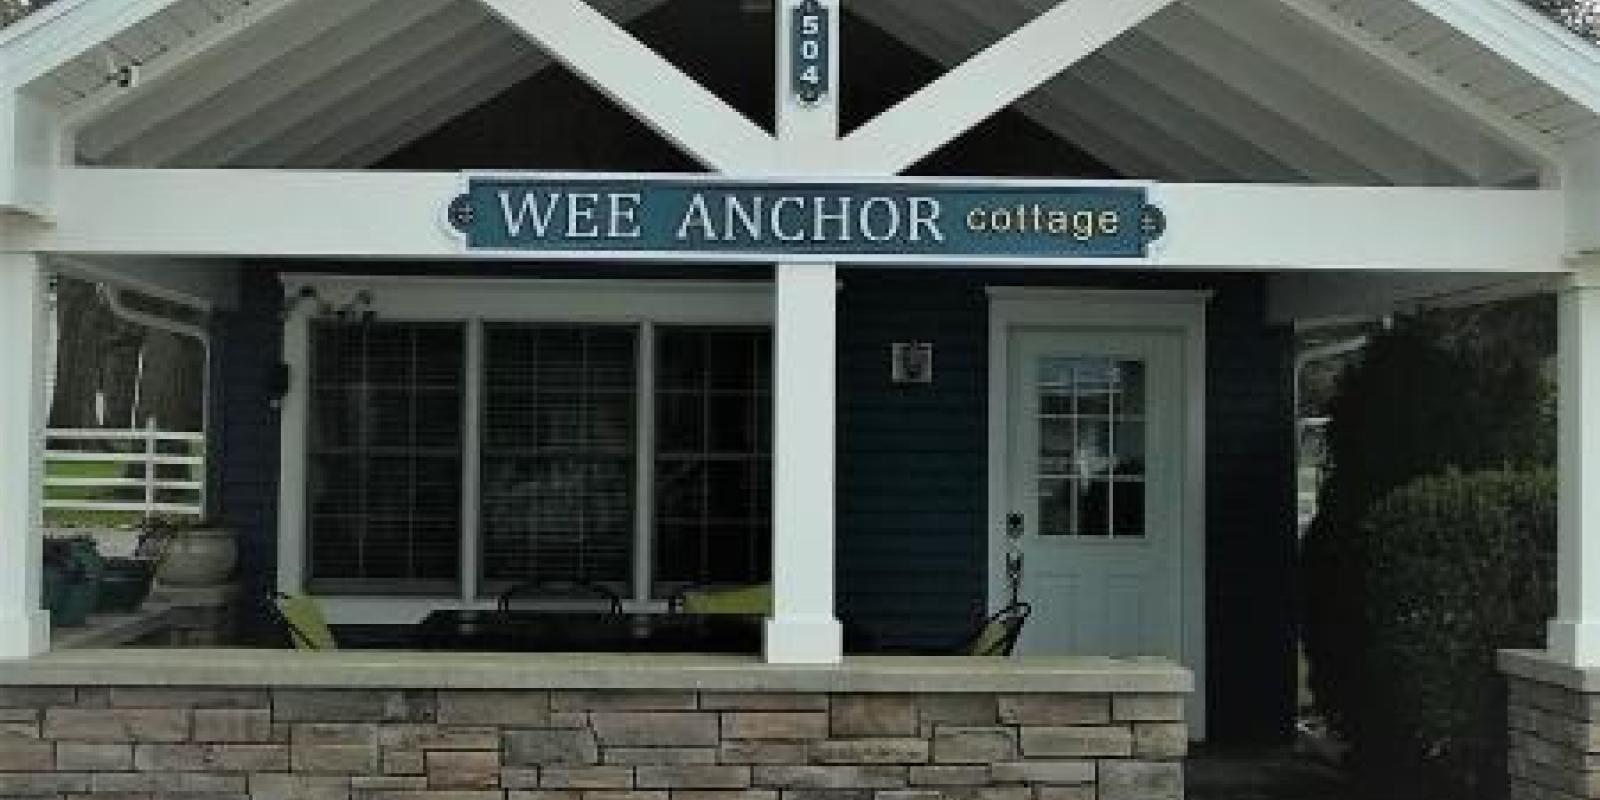 View of the Wee Anchor Cottage at the Anchor Inn Boutique Hotel, Put-in-Bay, OH